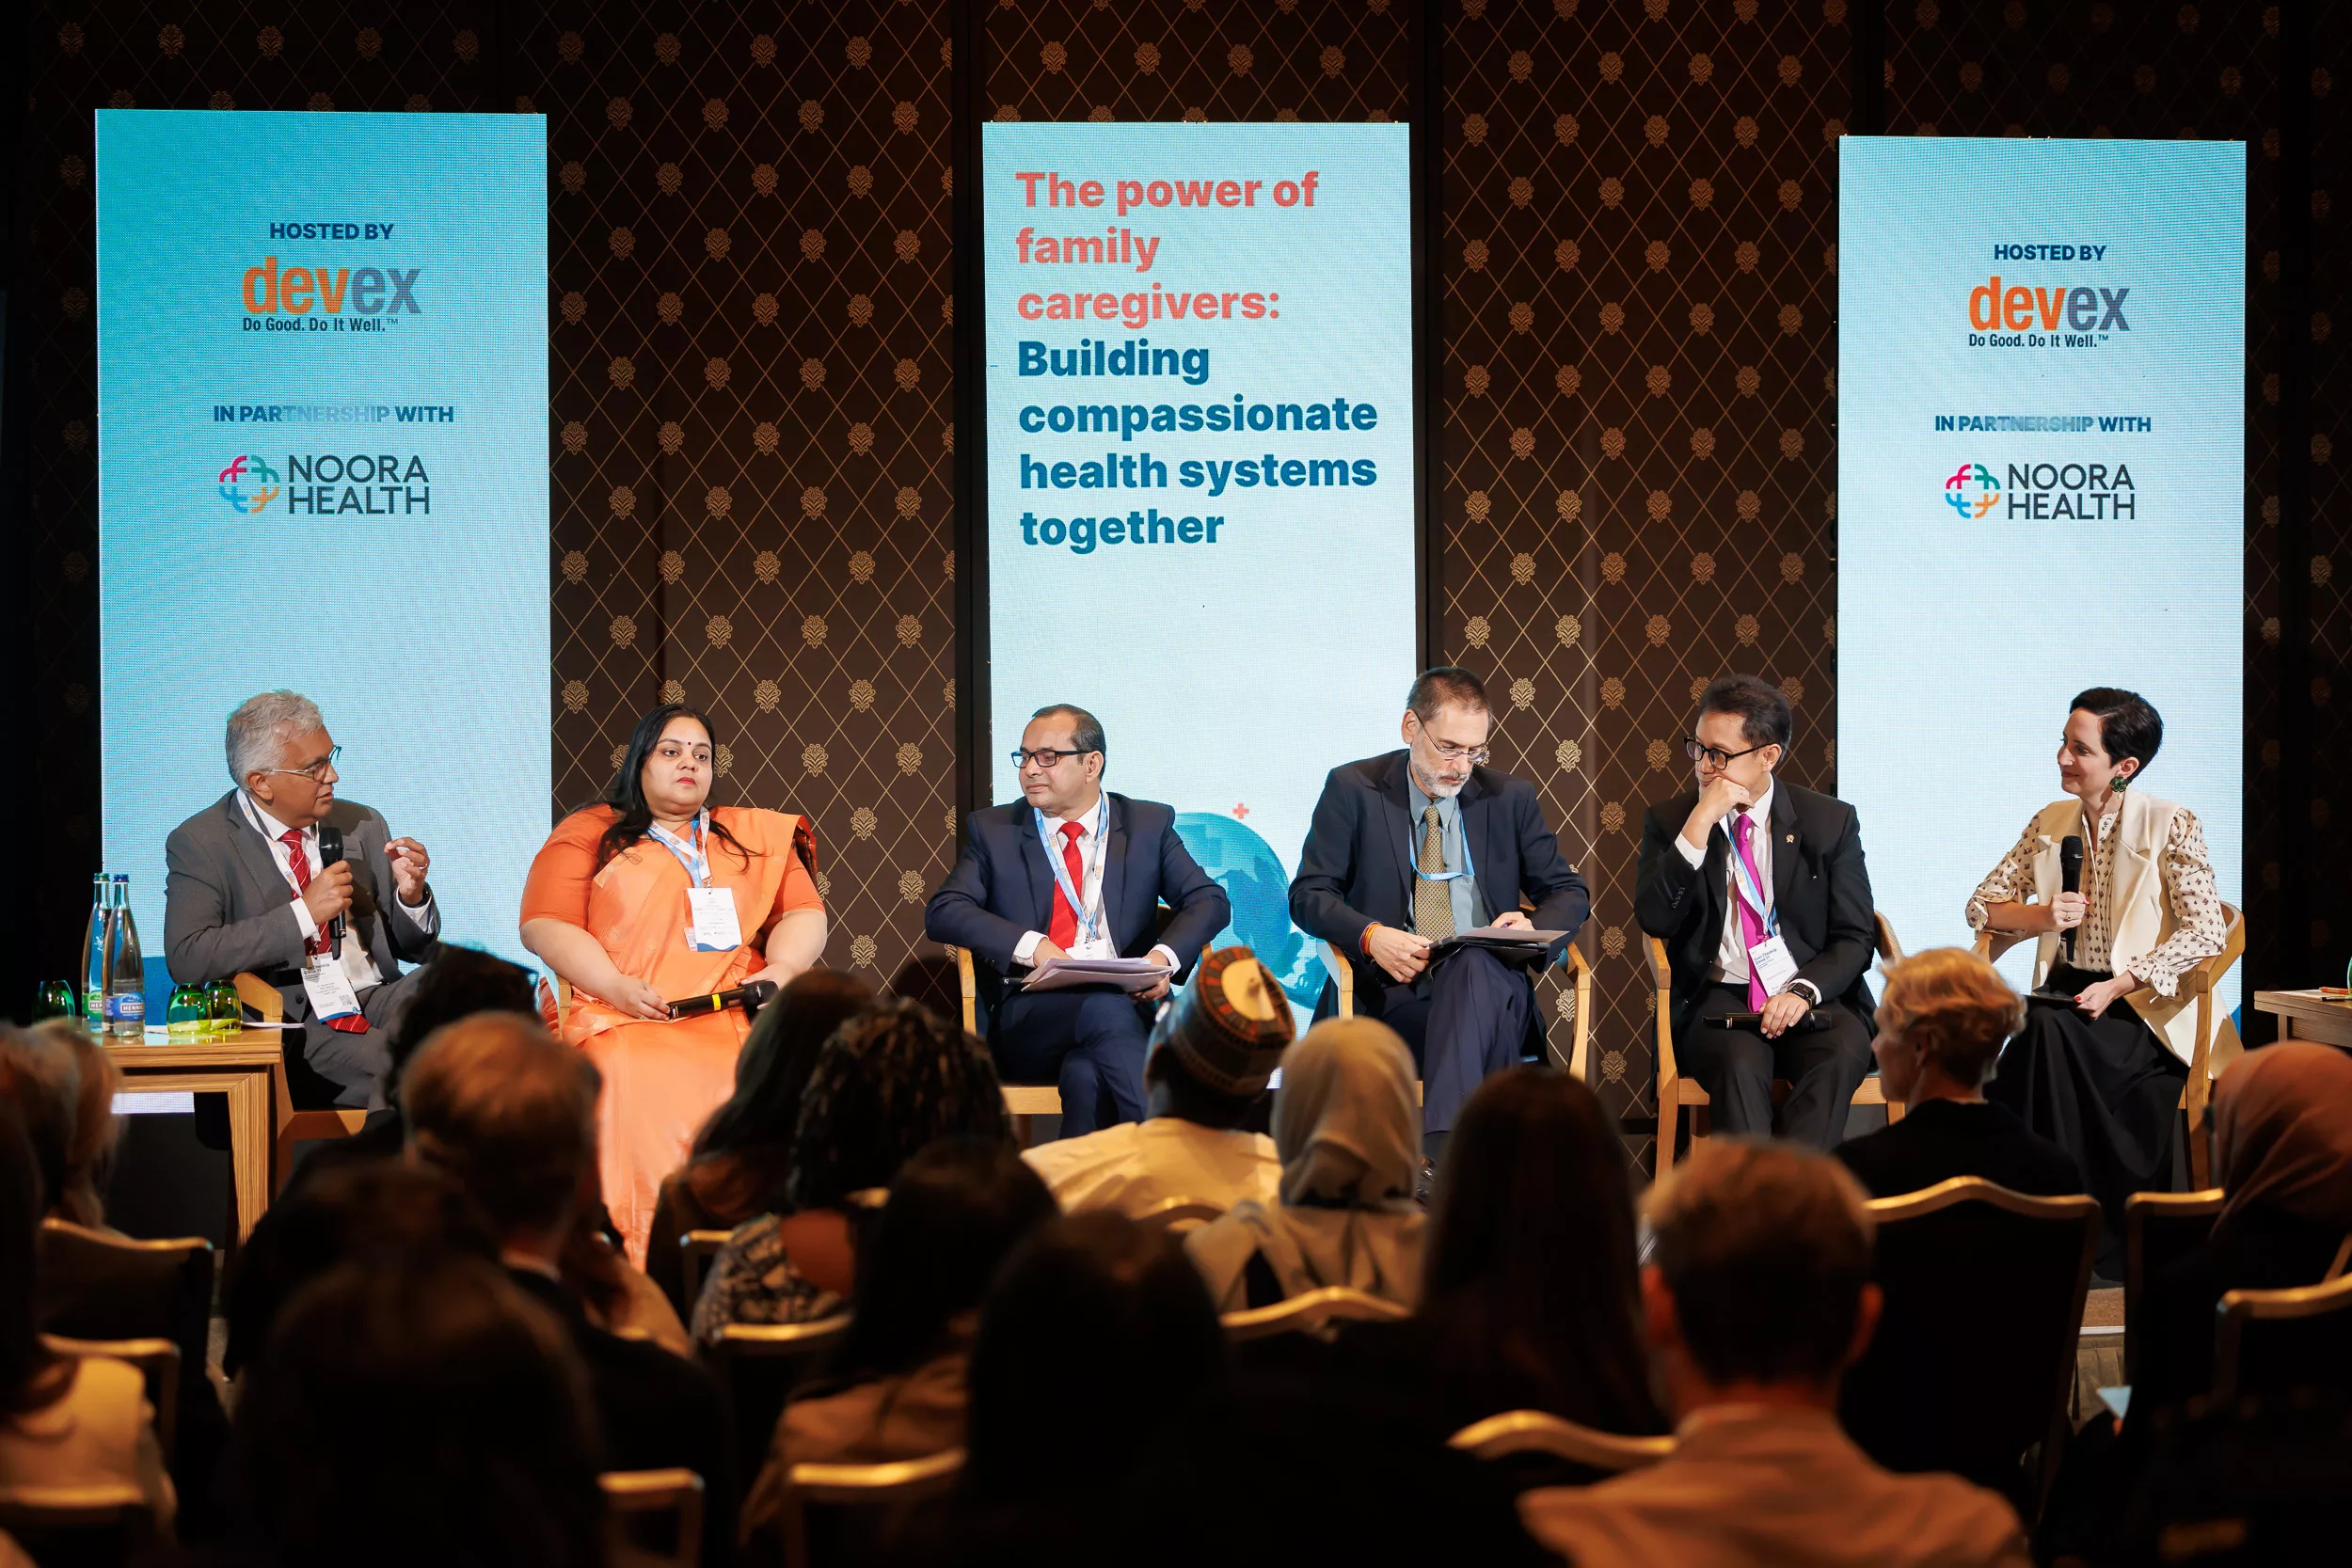 The power of family caregiving panel at the 77th World Health Assembly 2024_Credits_Devex_Marc Bader_eventphotographer.ch